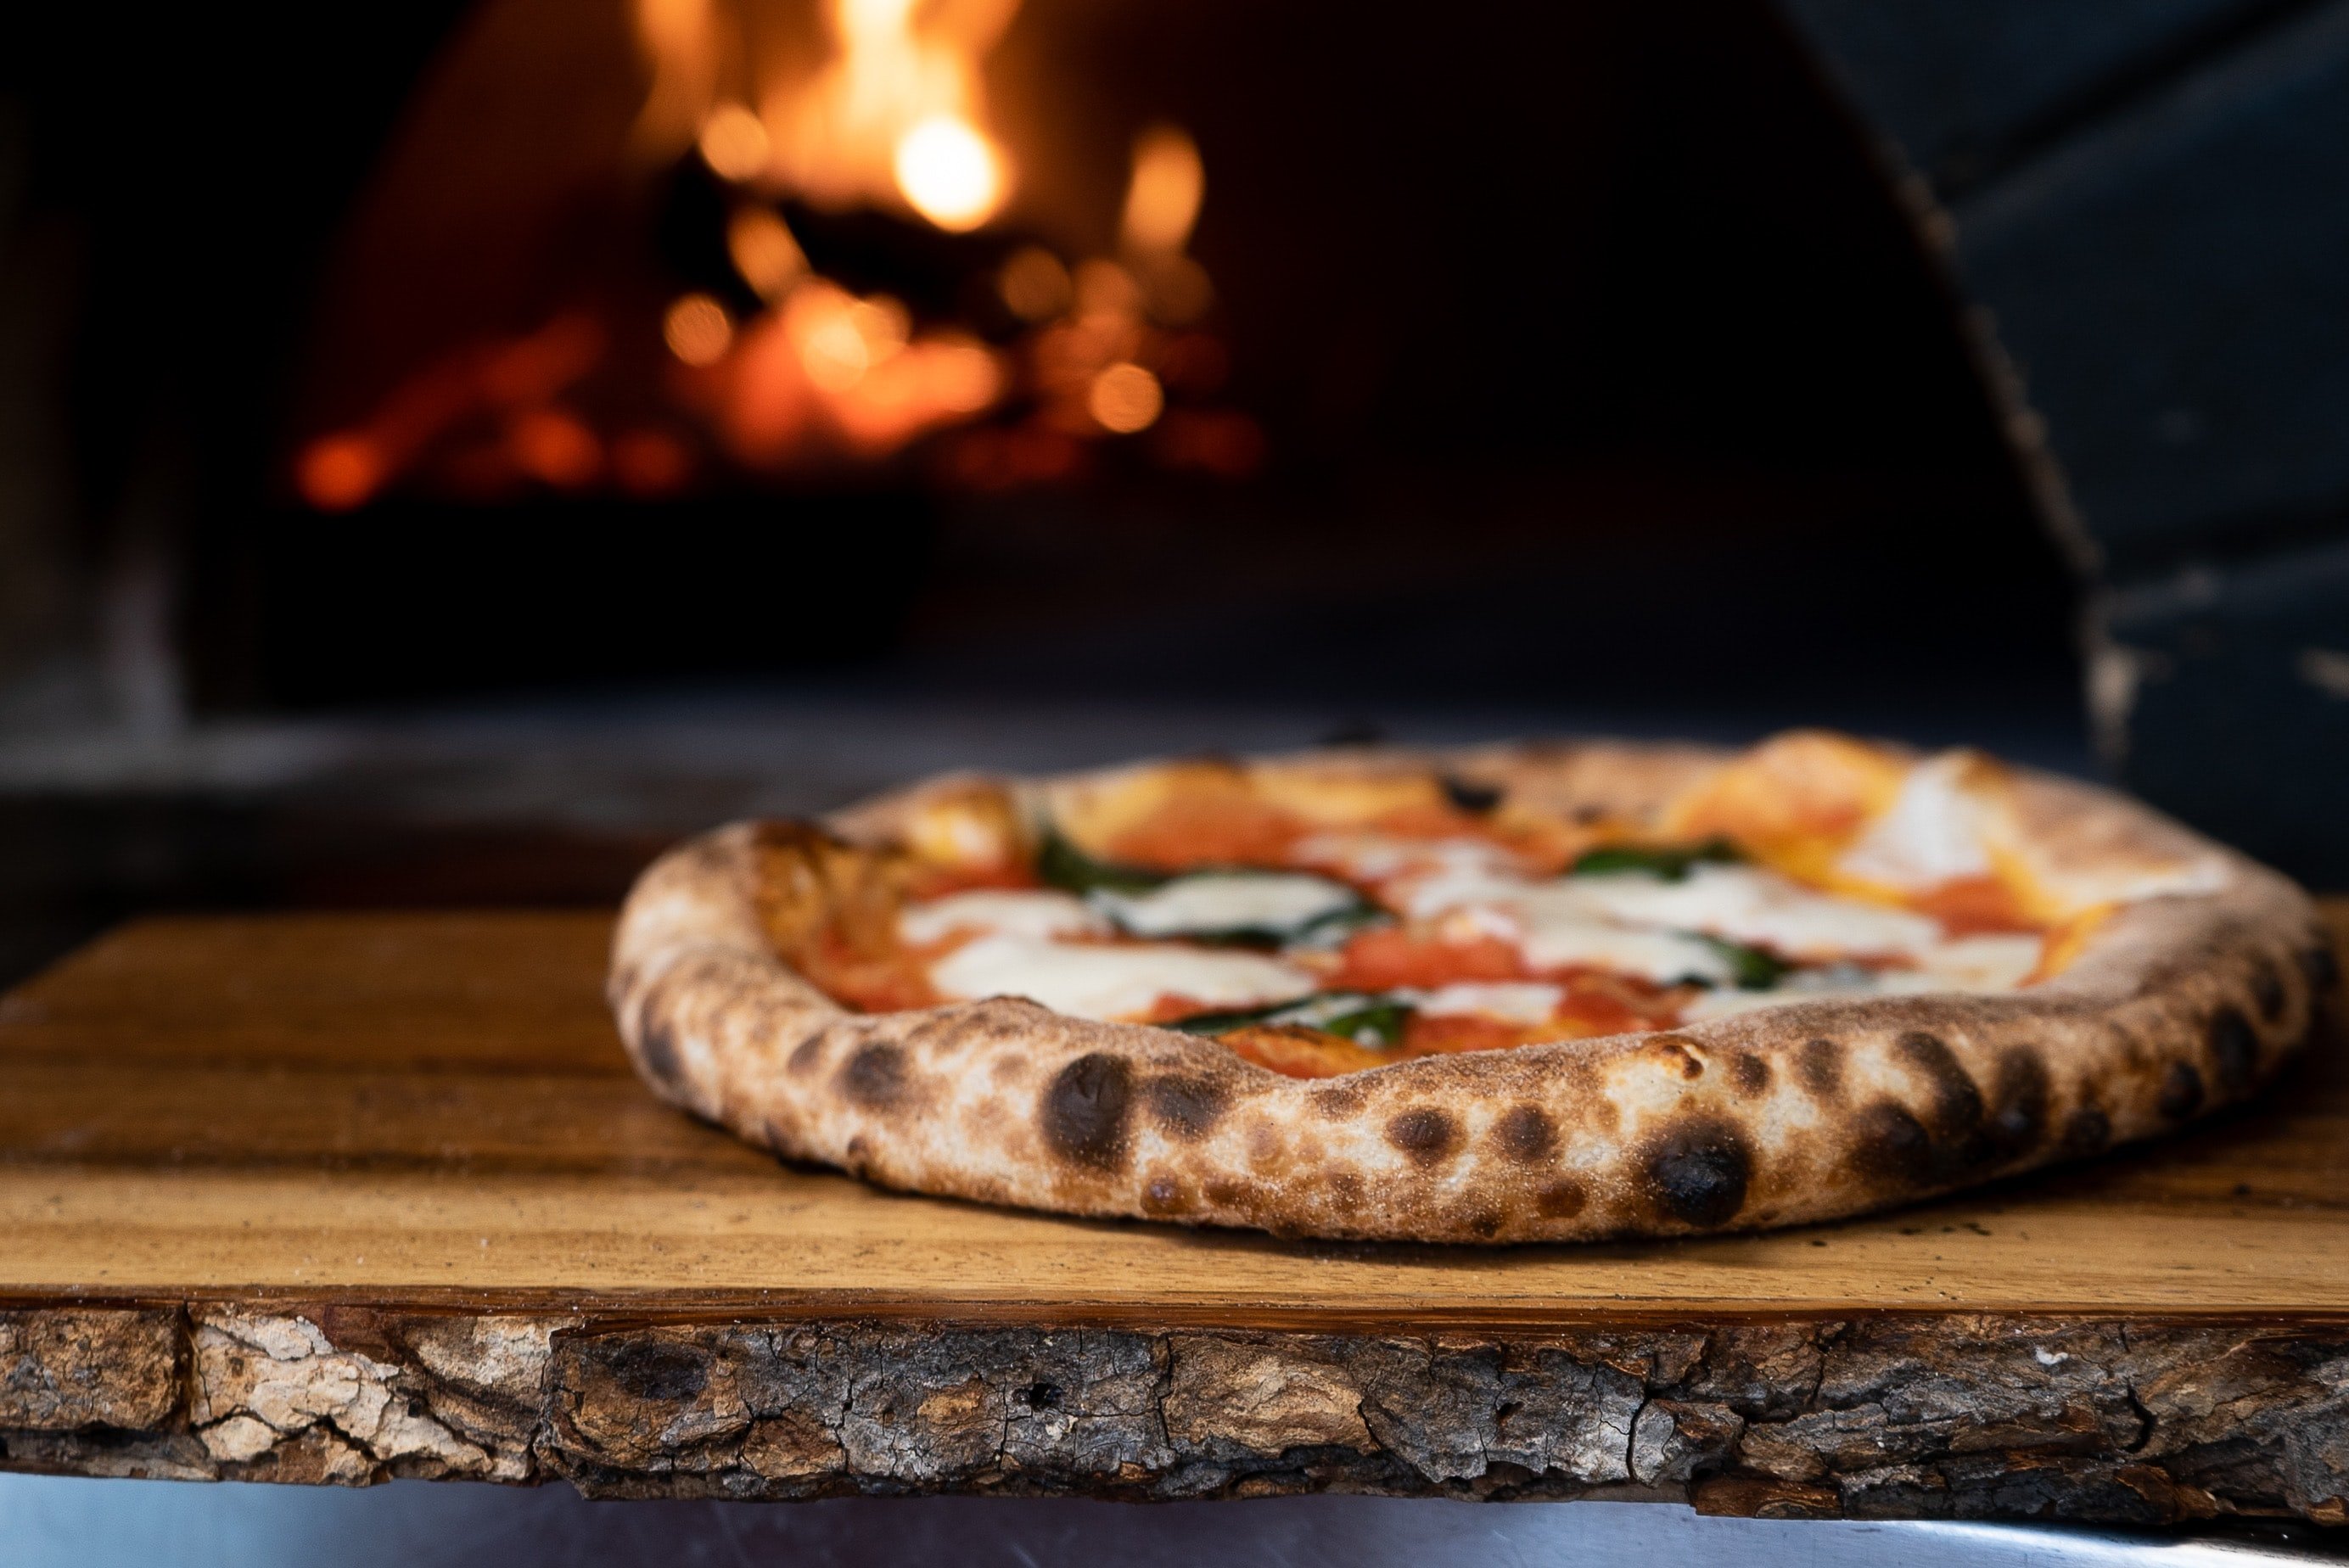 Different types of pizza ovens